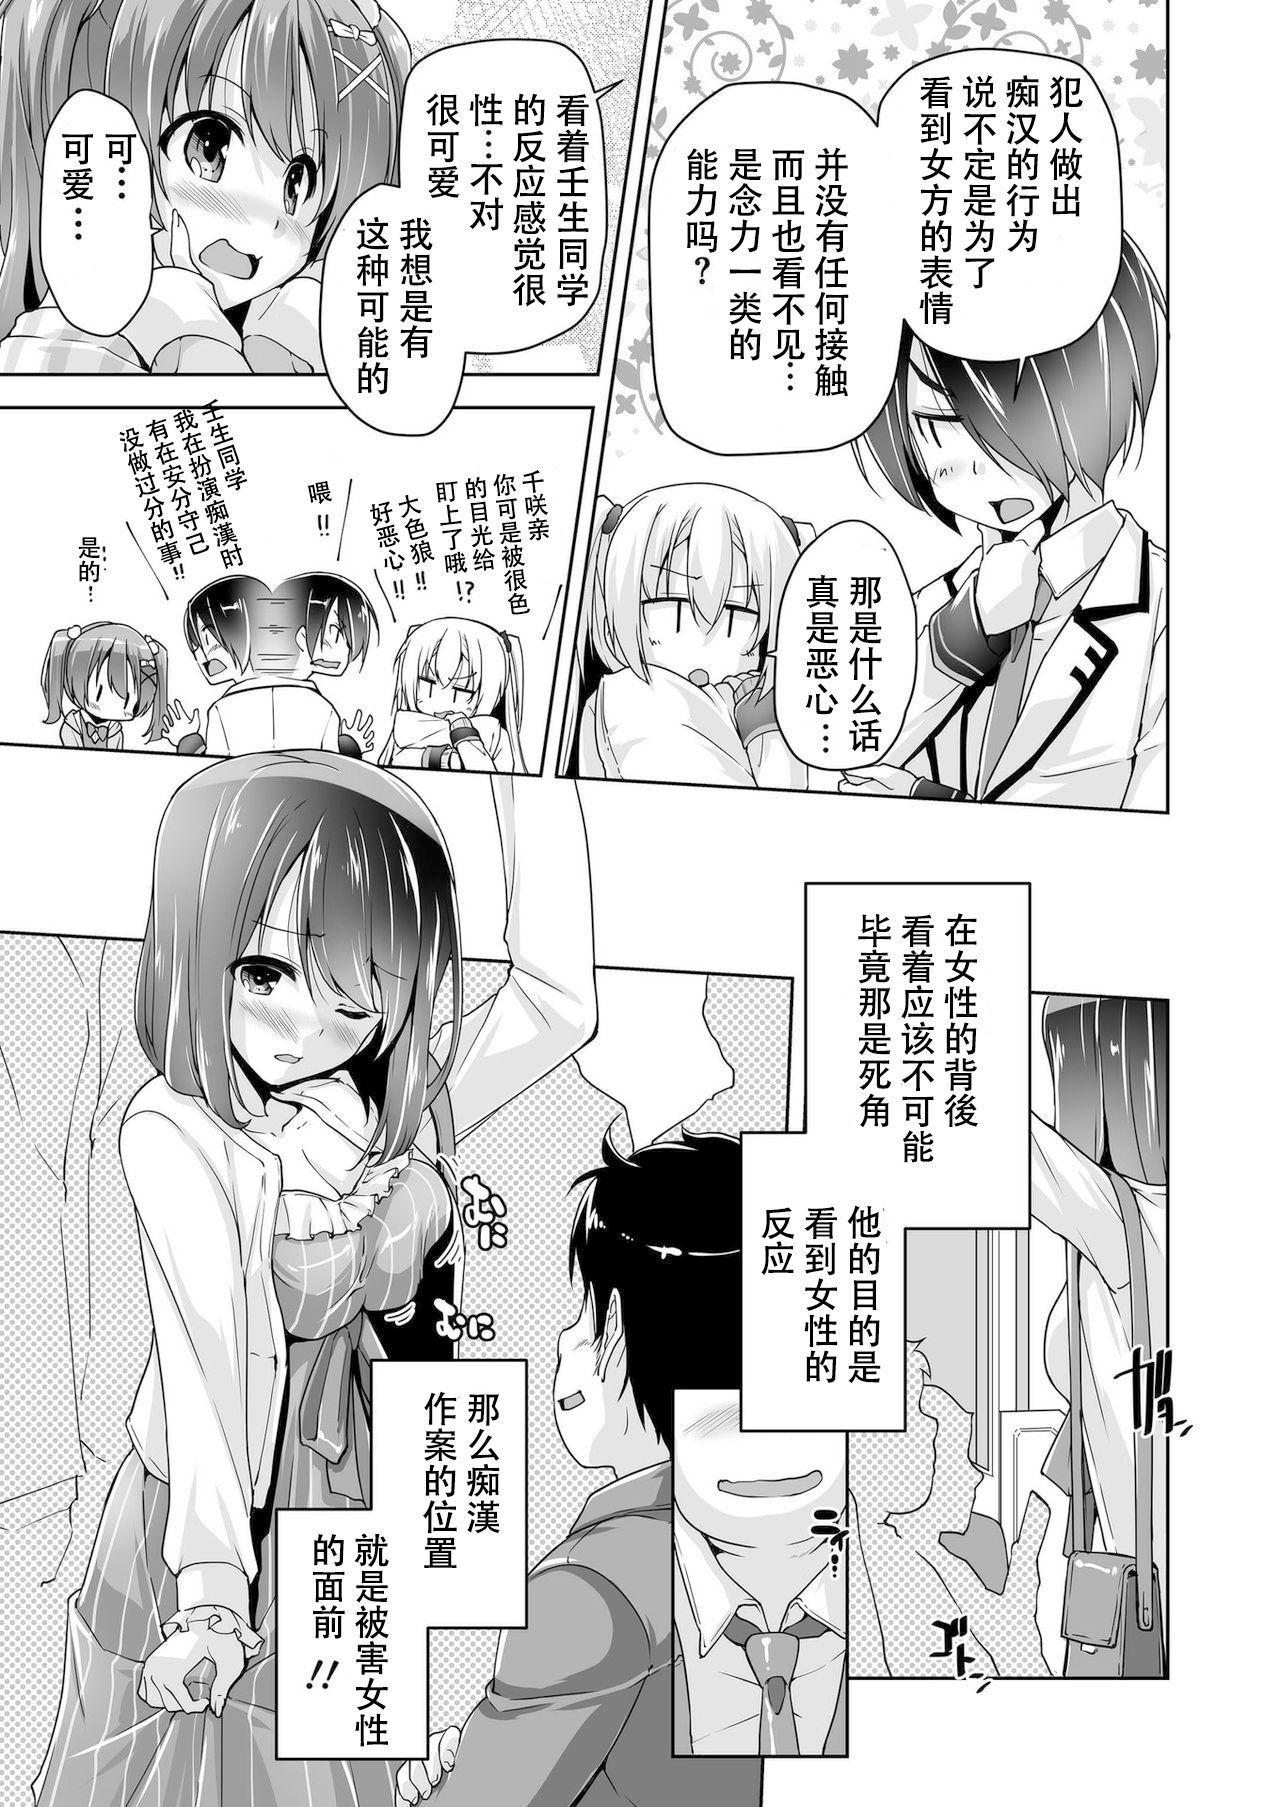 Wild Chisaki to chikan play de hatsu H! ? - Riddle joker Soapy - Page 5